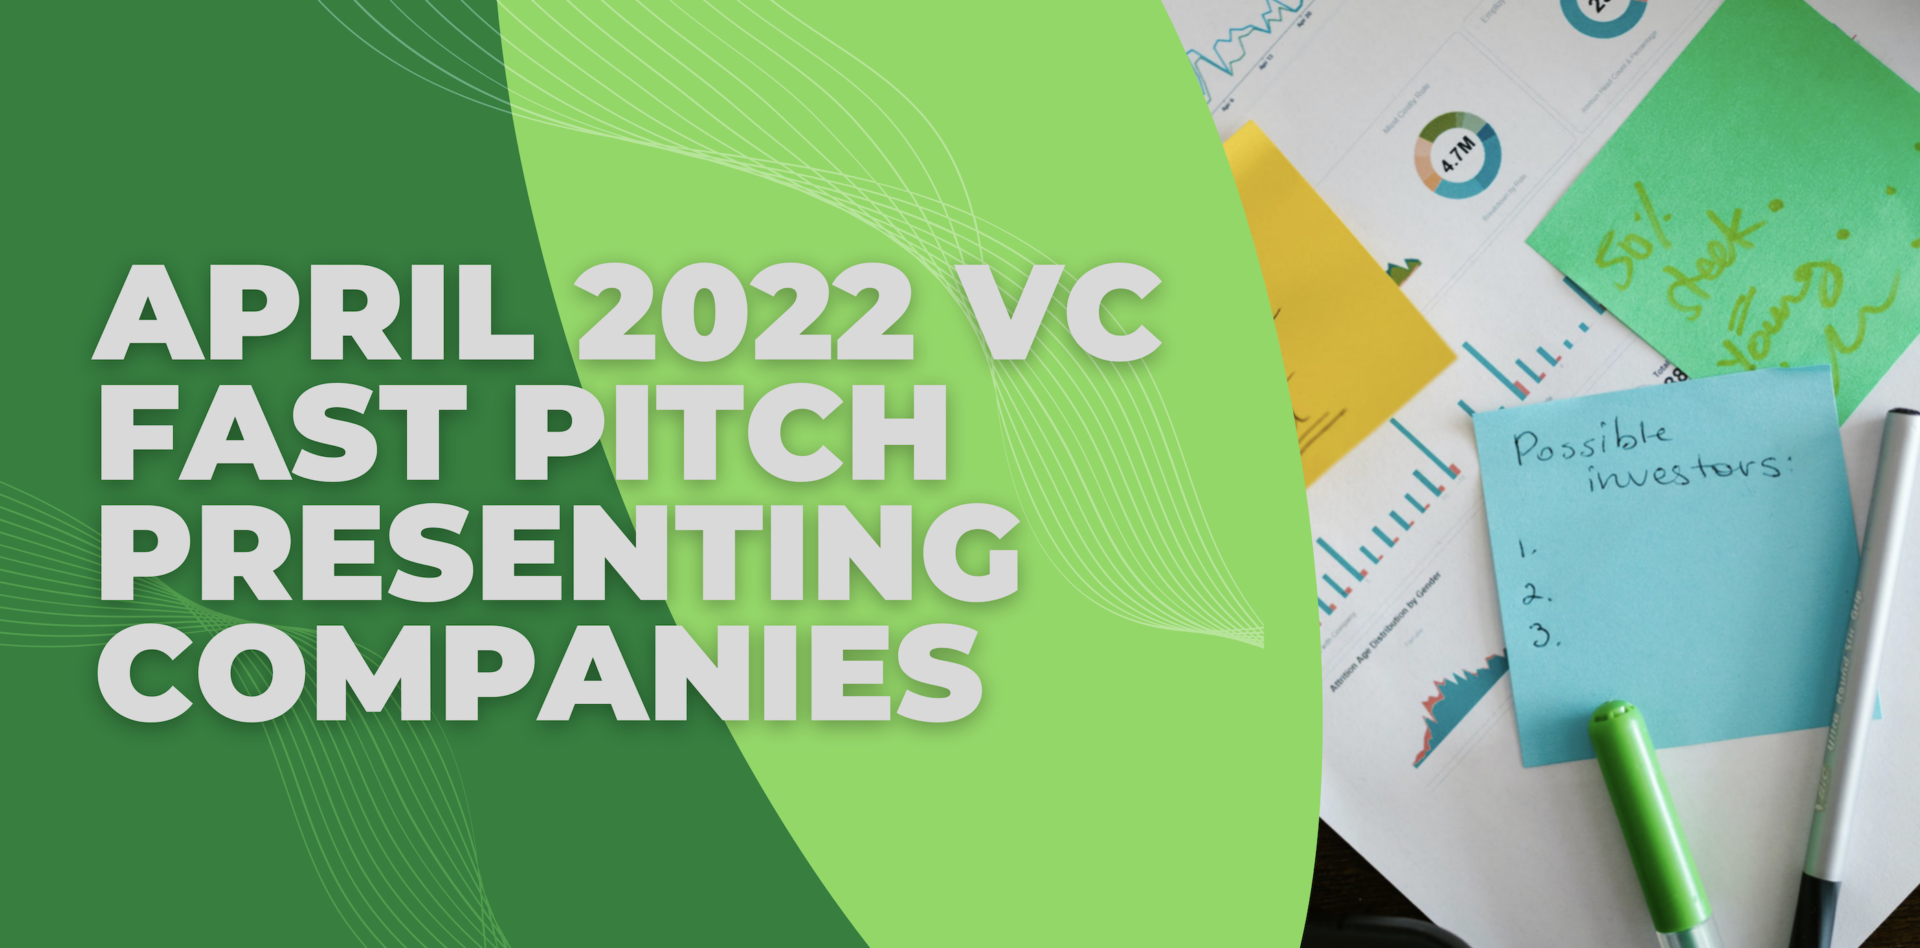 You are currently viewing April 2022 VC Fast Pitch Presenting Companies